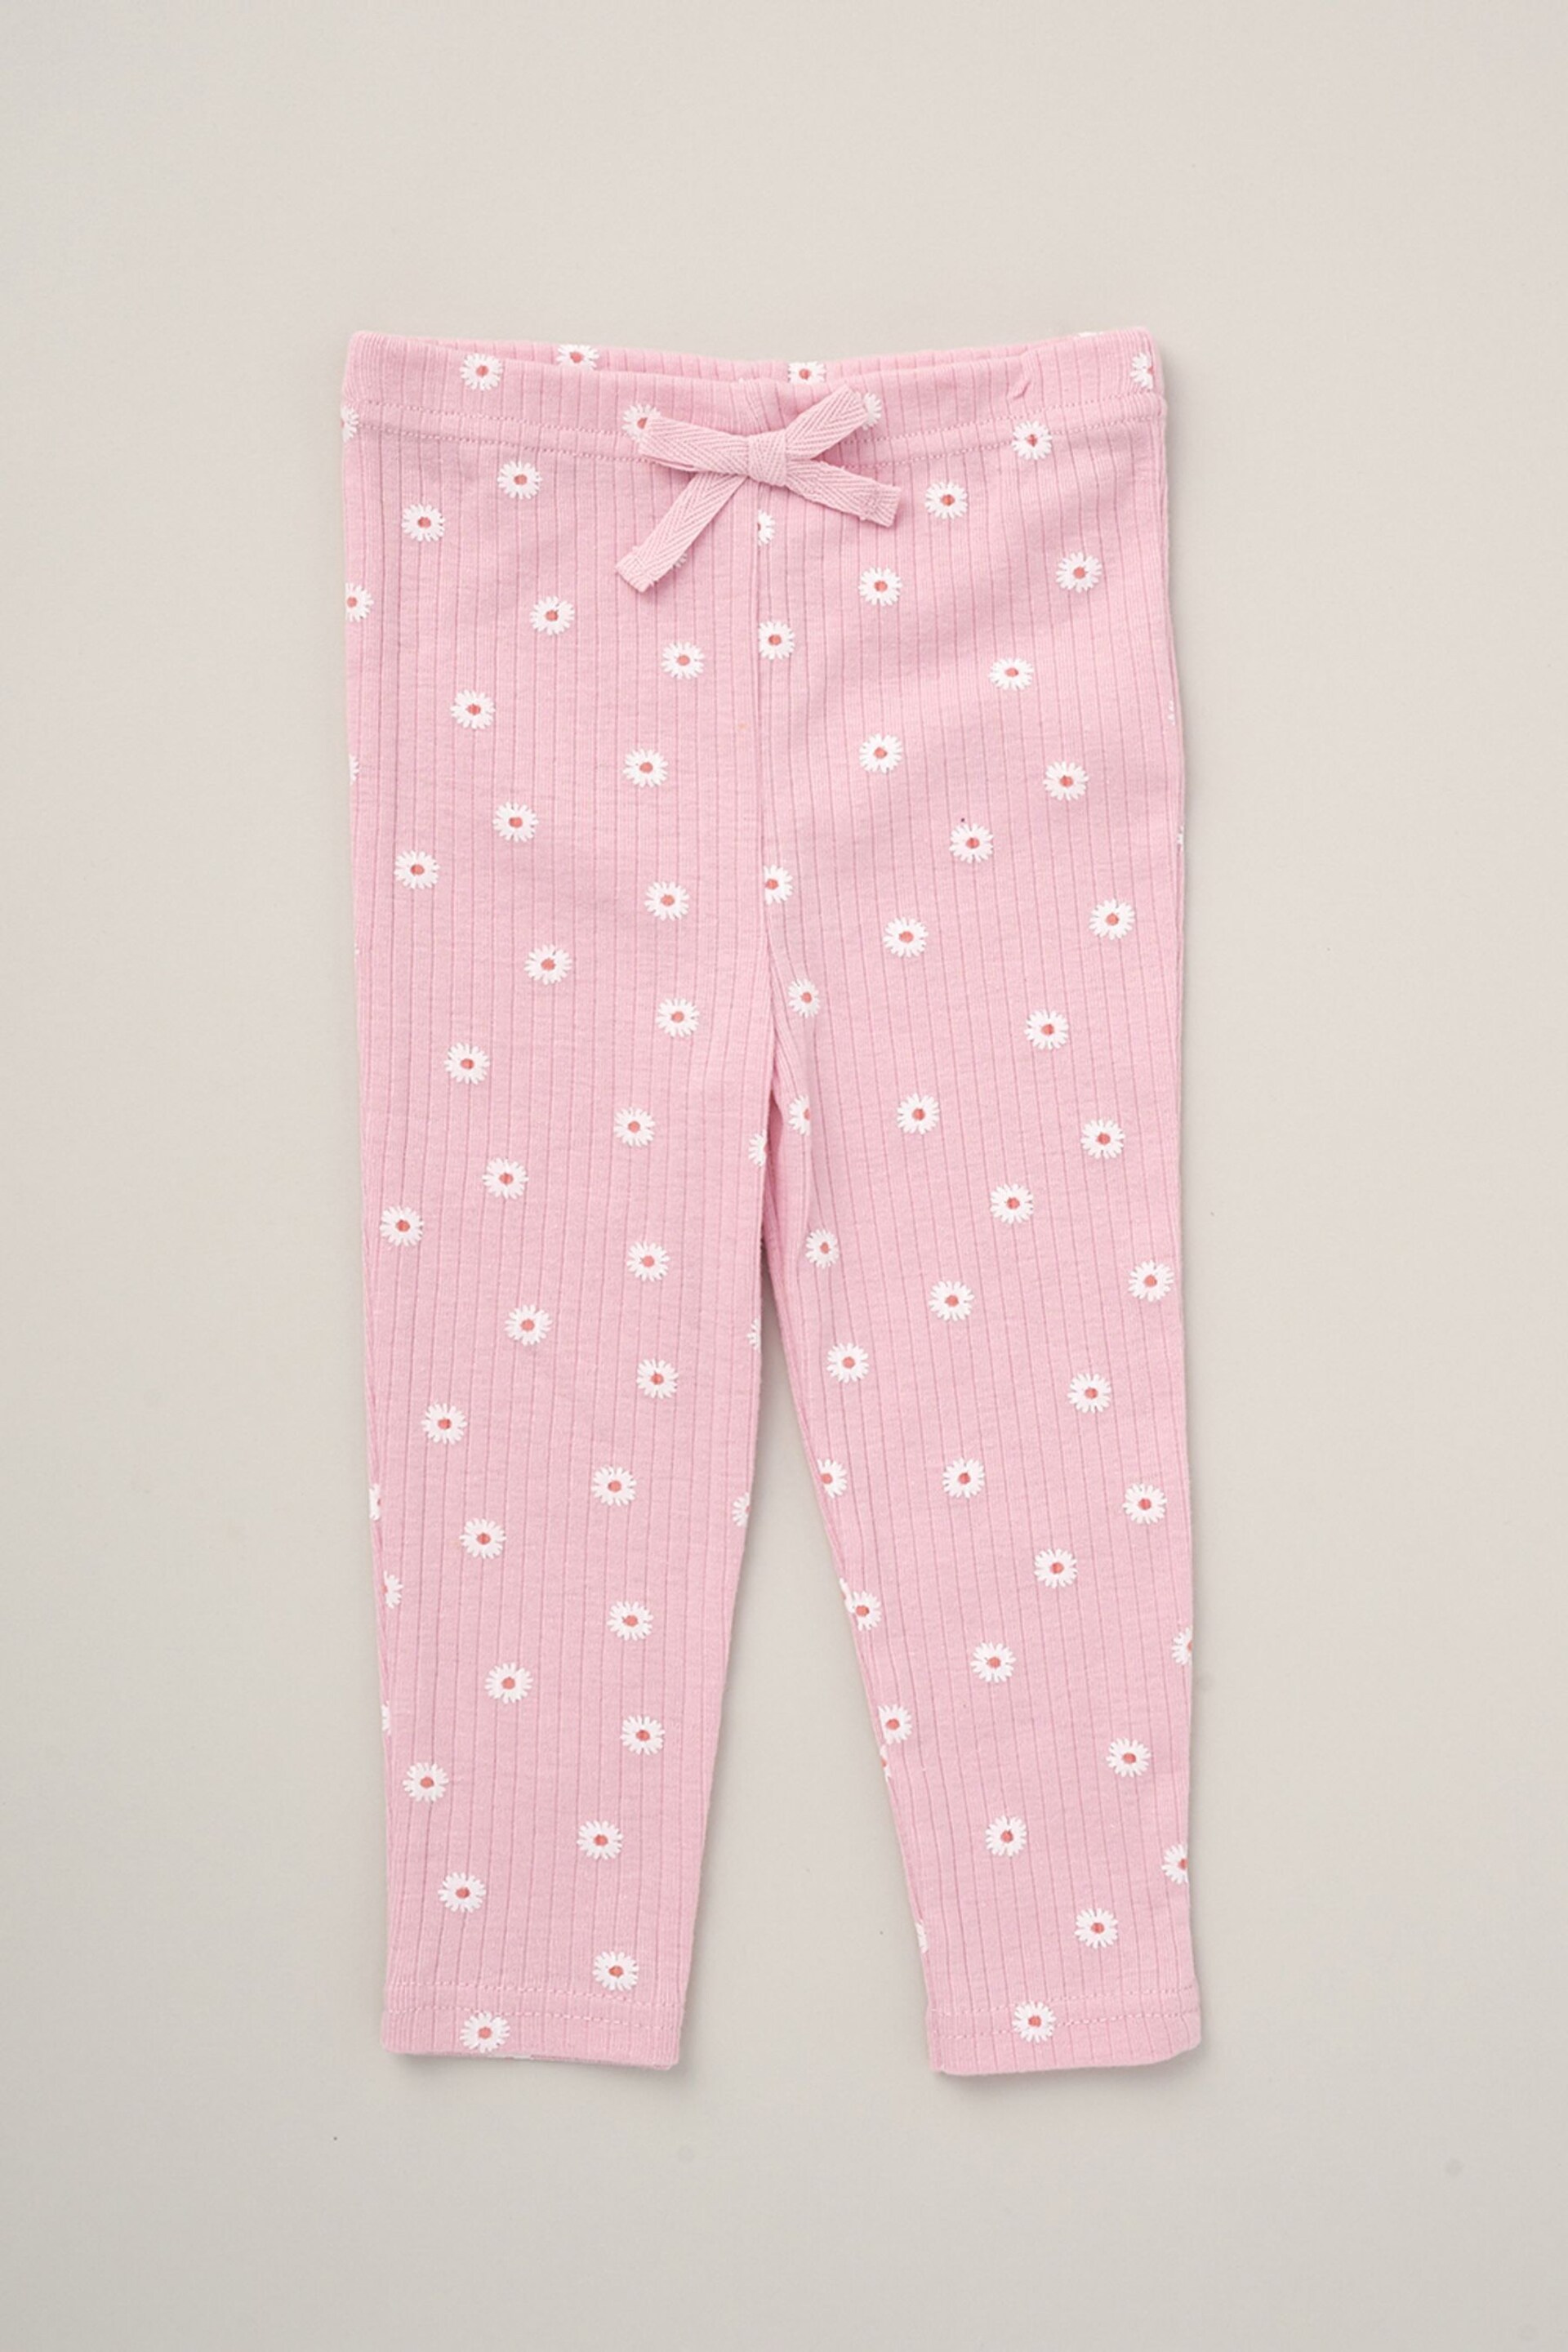 Lily & Jack Pink Broderie Detail Top Joggers And Headband Outfit Set 3 Piece - Image 4 of 5